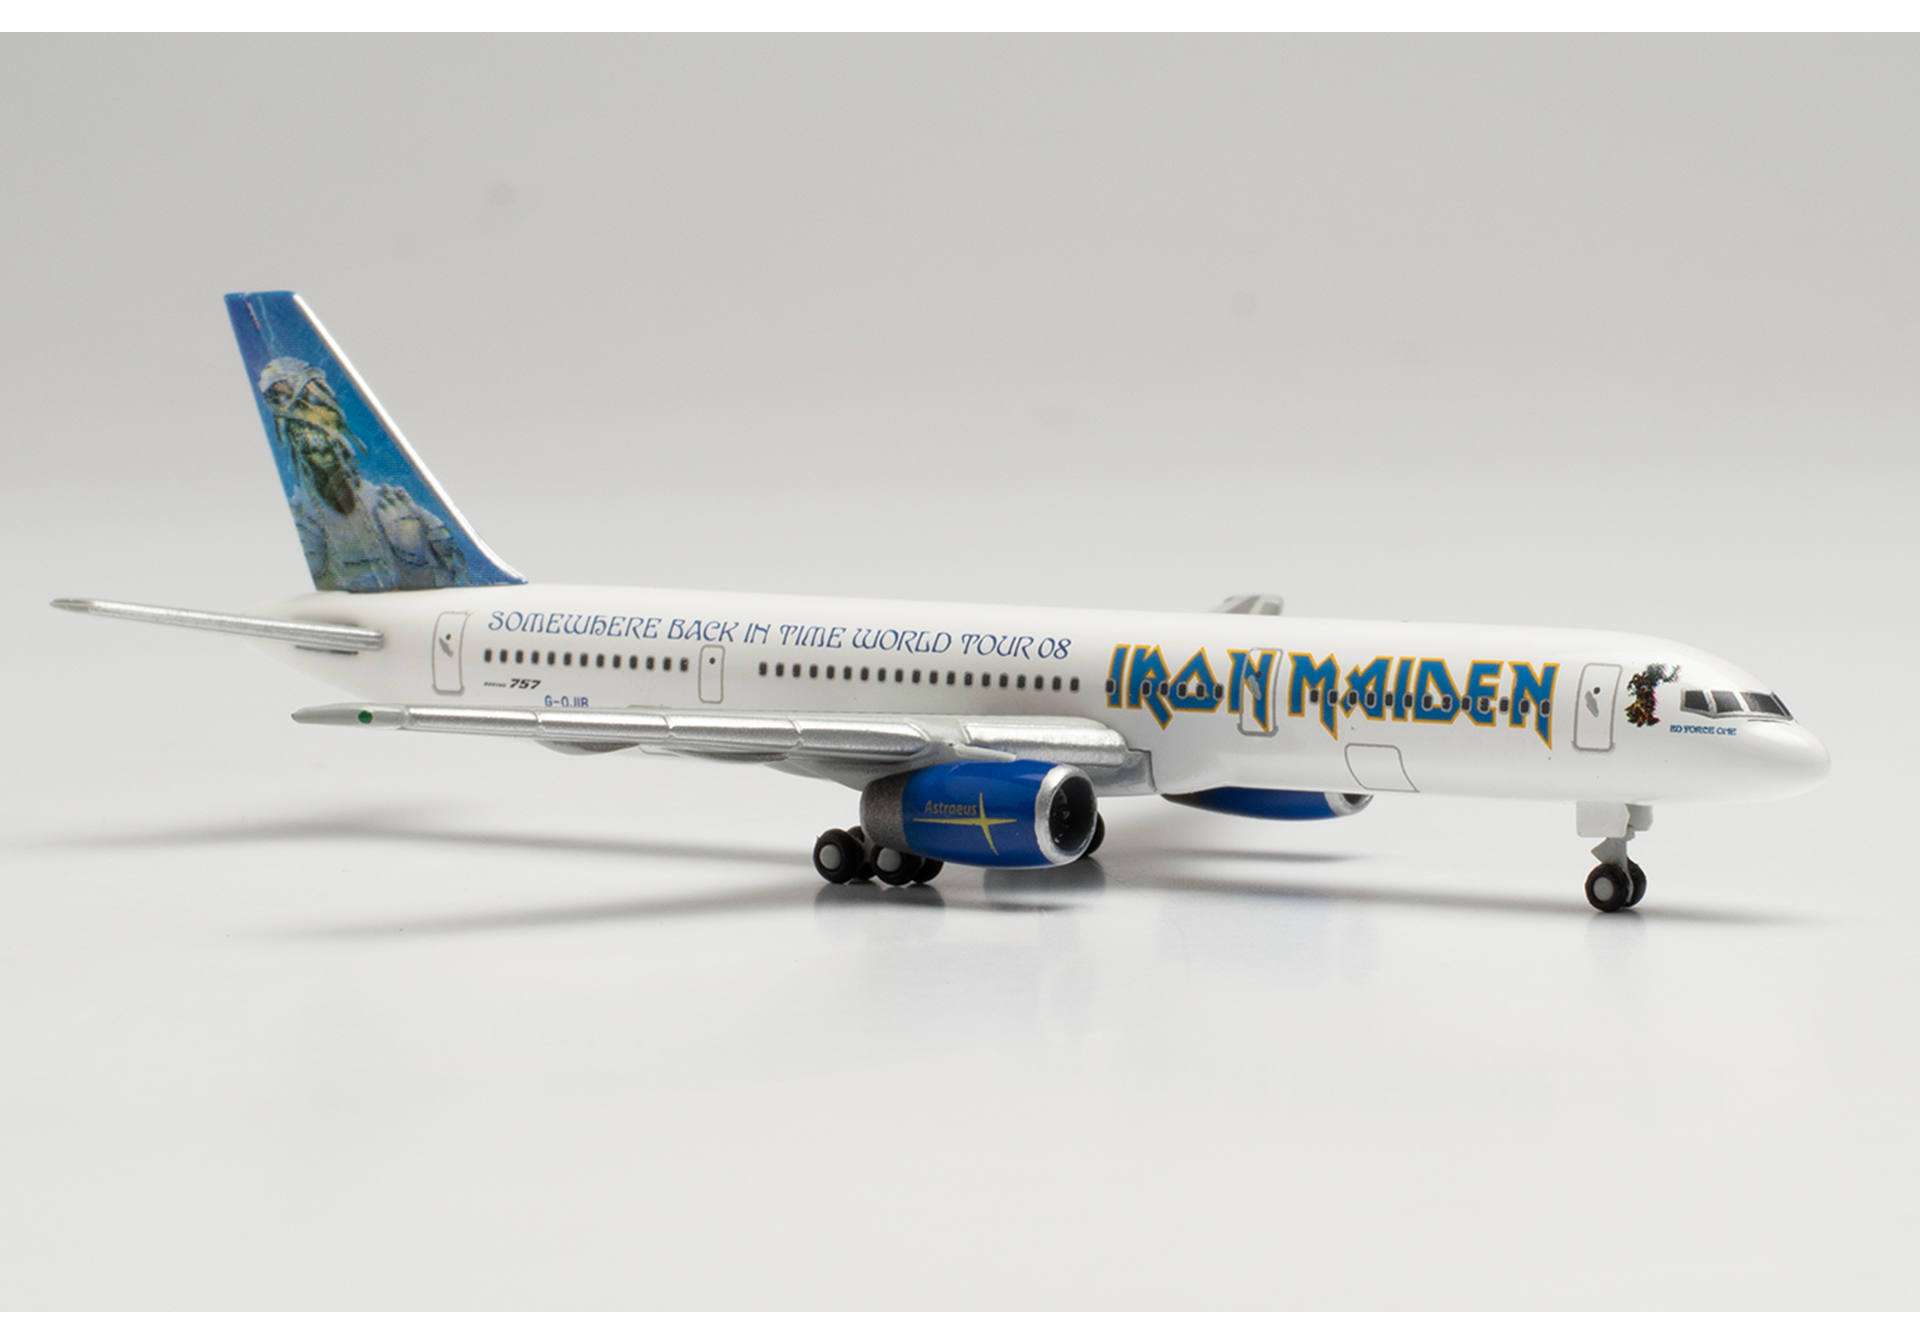 Iron Maiden (Astraeus) Boeing 757-200 “Ed Force One” - Somewhere Back in Time World Tour 2008 – G-OJIB